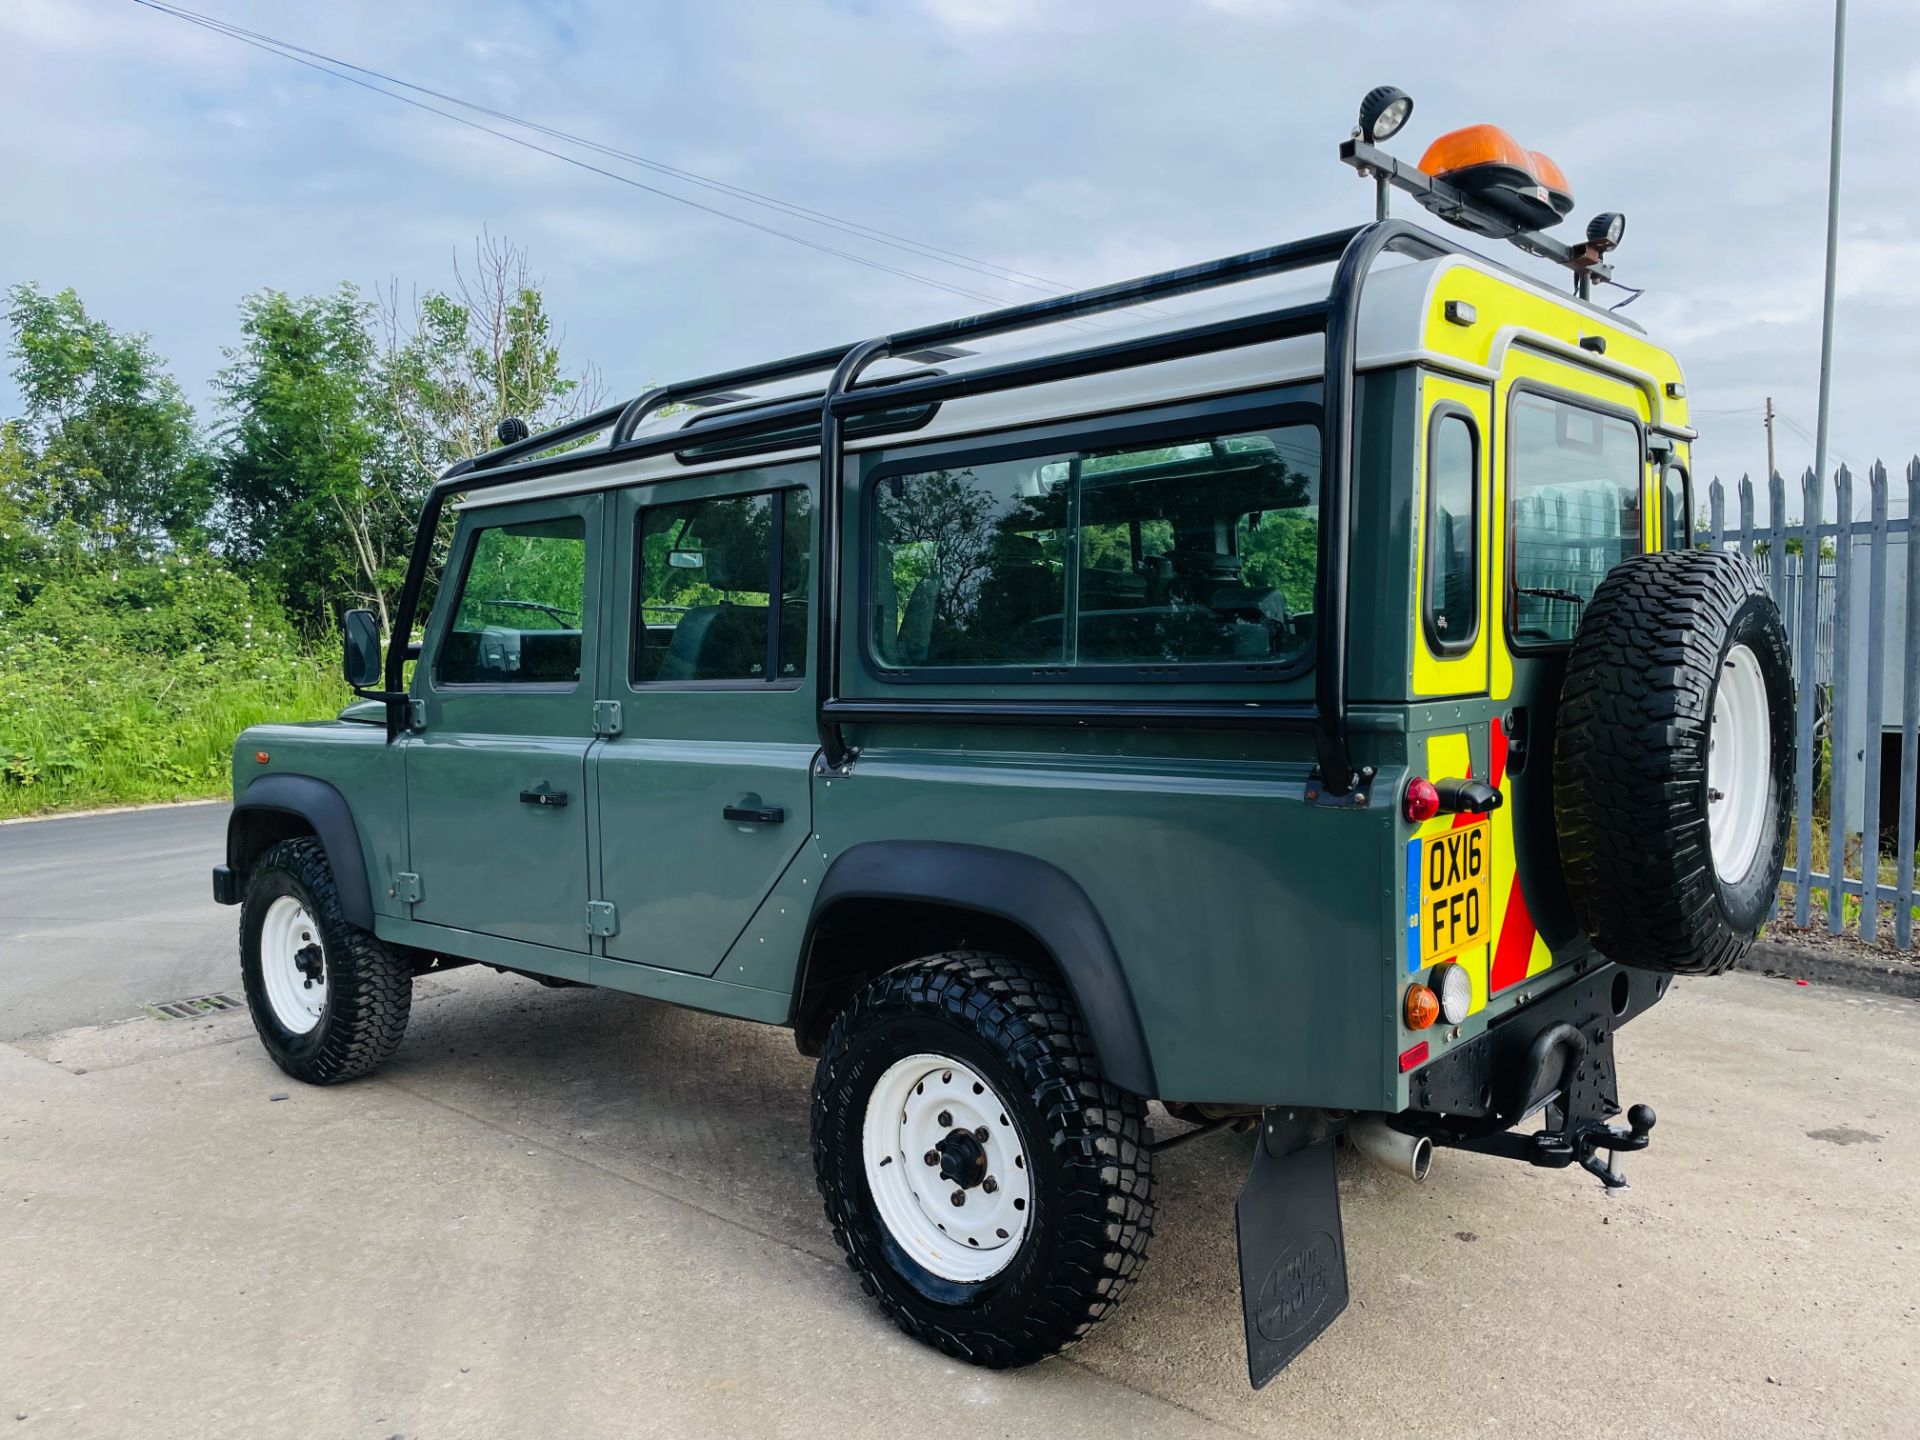 (Reserve Met) LAND ROVER DEFENDER 110 2.2TDCI COUNTY STATION WAGON (2016)1 OWNER -25K WITH HISTORY - Image 11 of 20